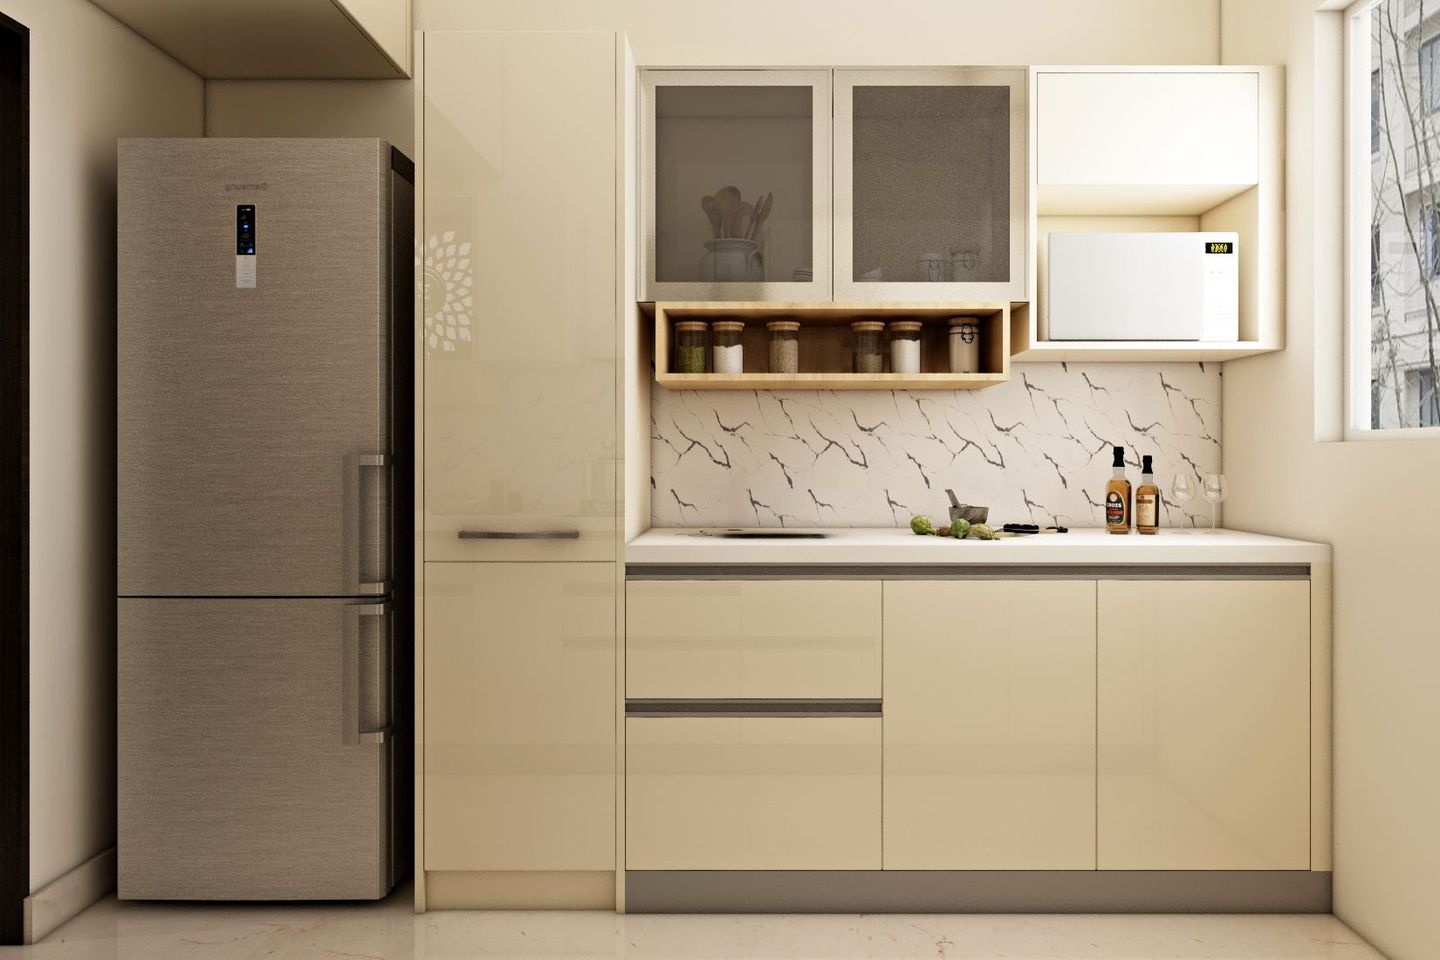 Contemporary Parallel Kitchen Design With Off-White Cabinets